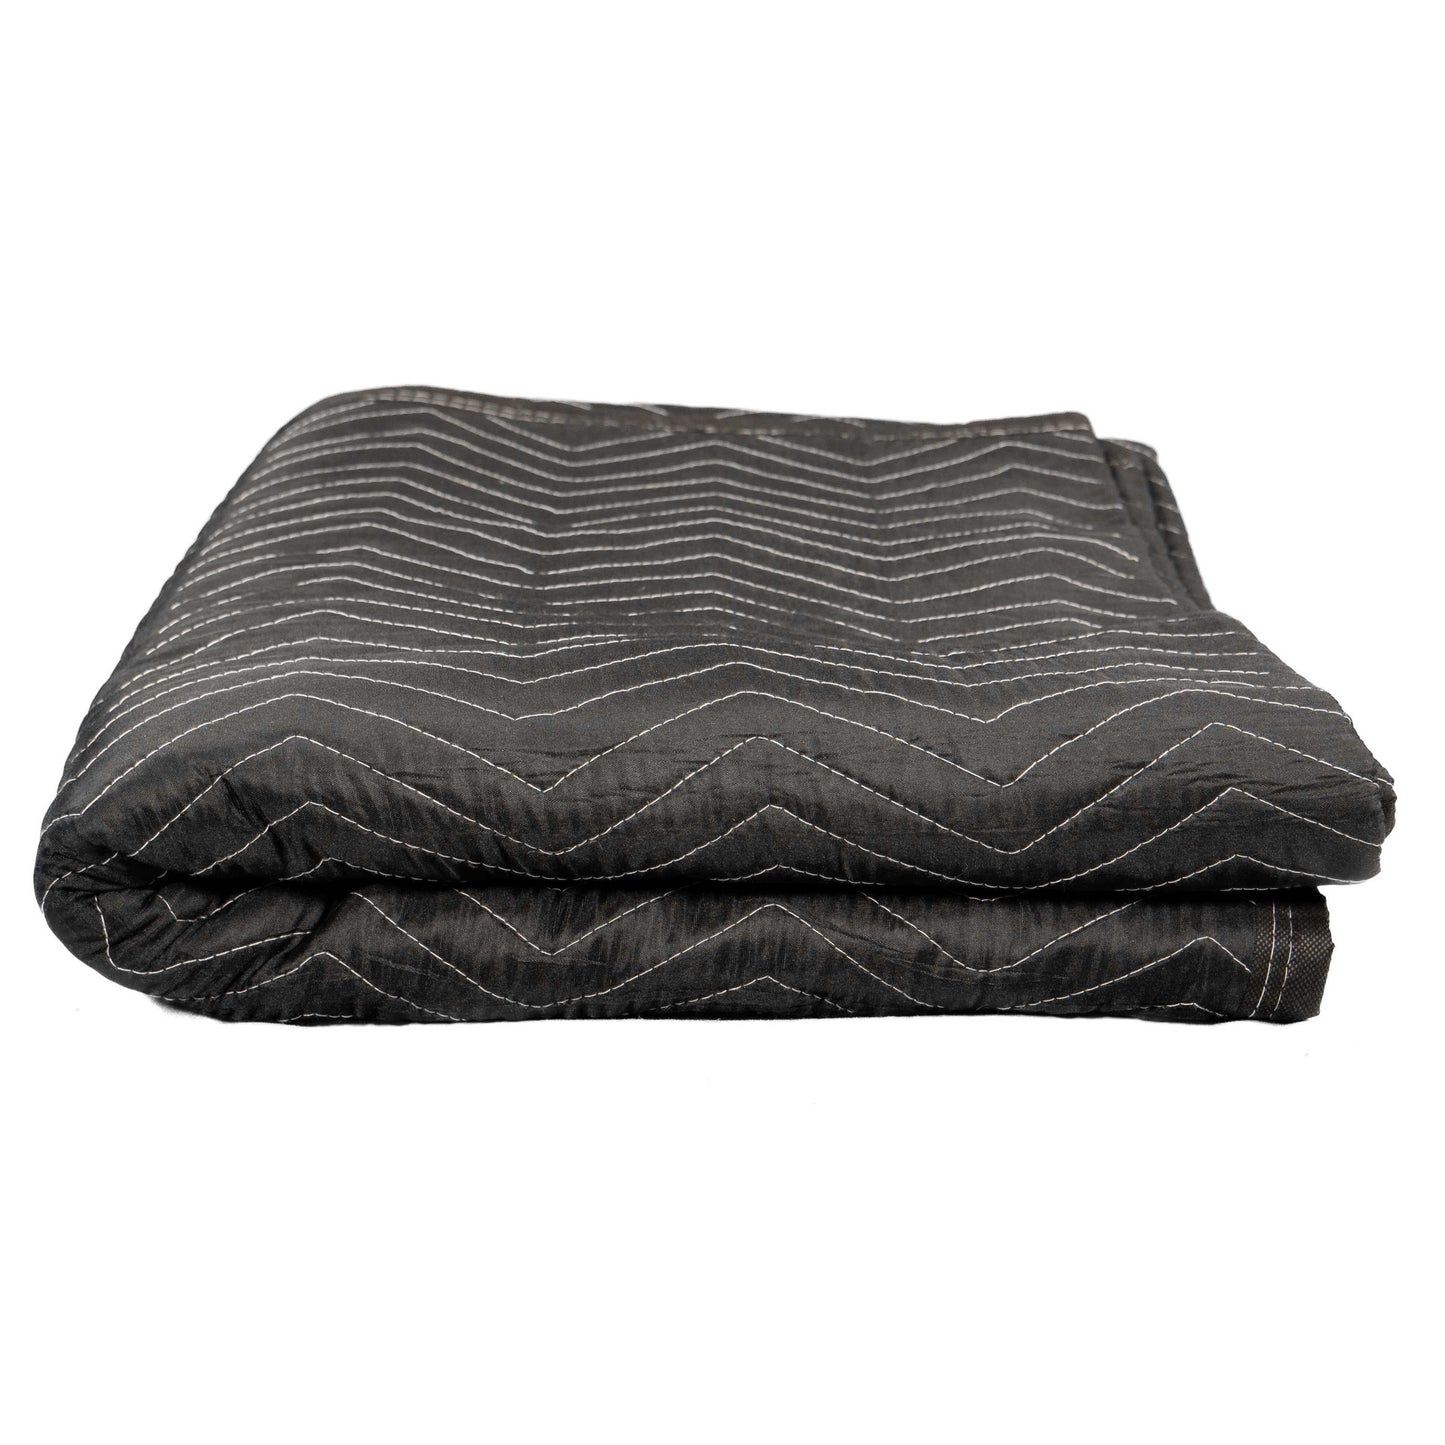 Moving Blankets - Preferred Mover Single Pack - 78-80 lbs/dozen image 2 of 11